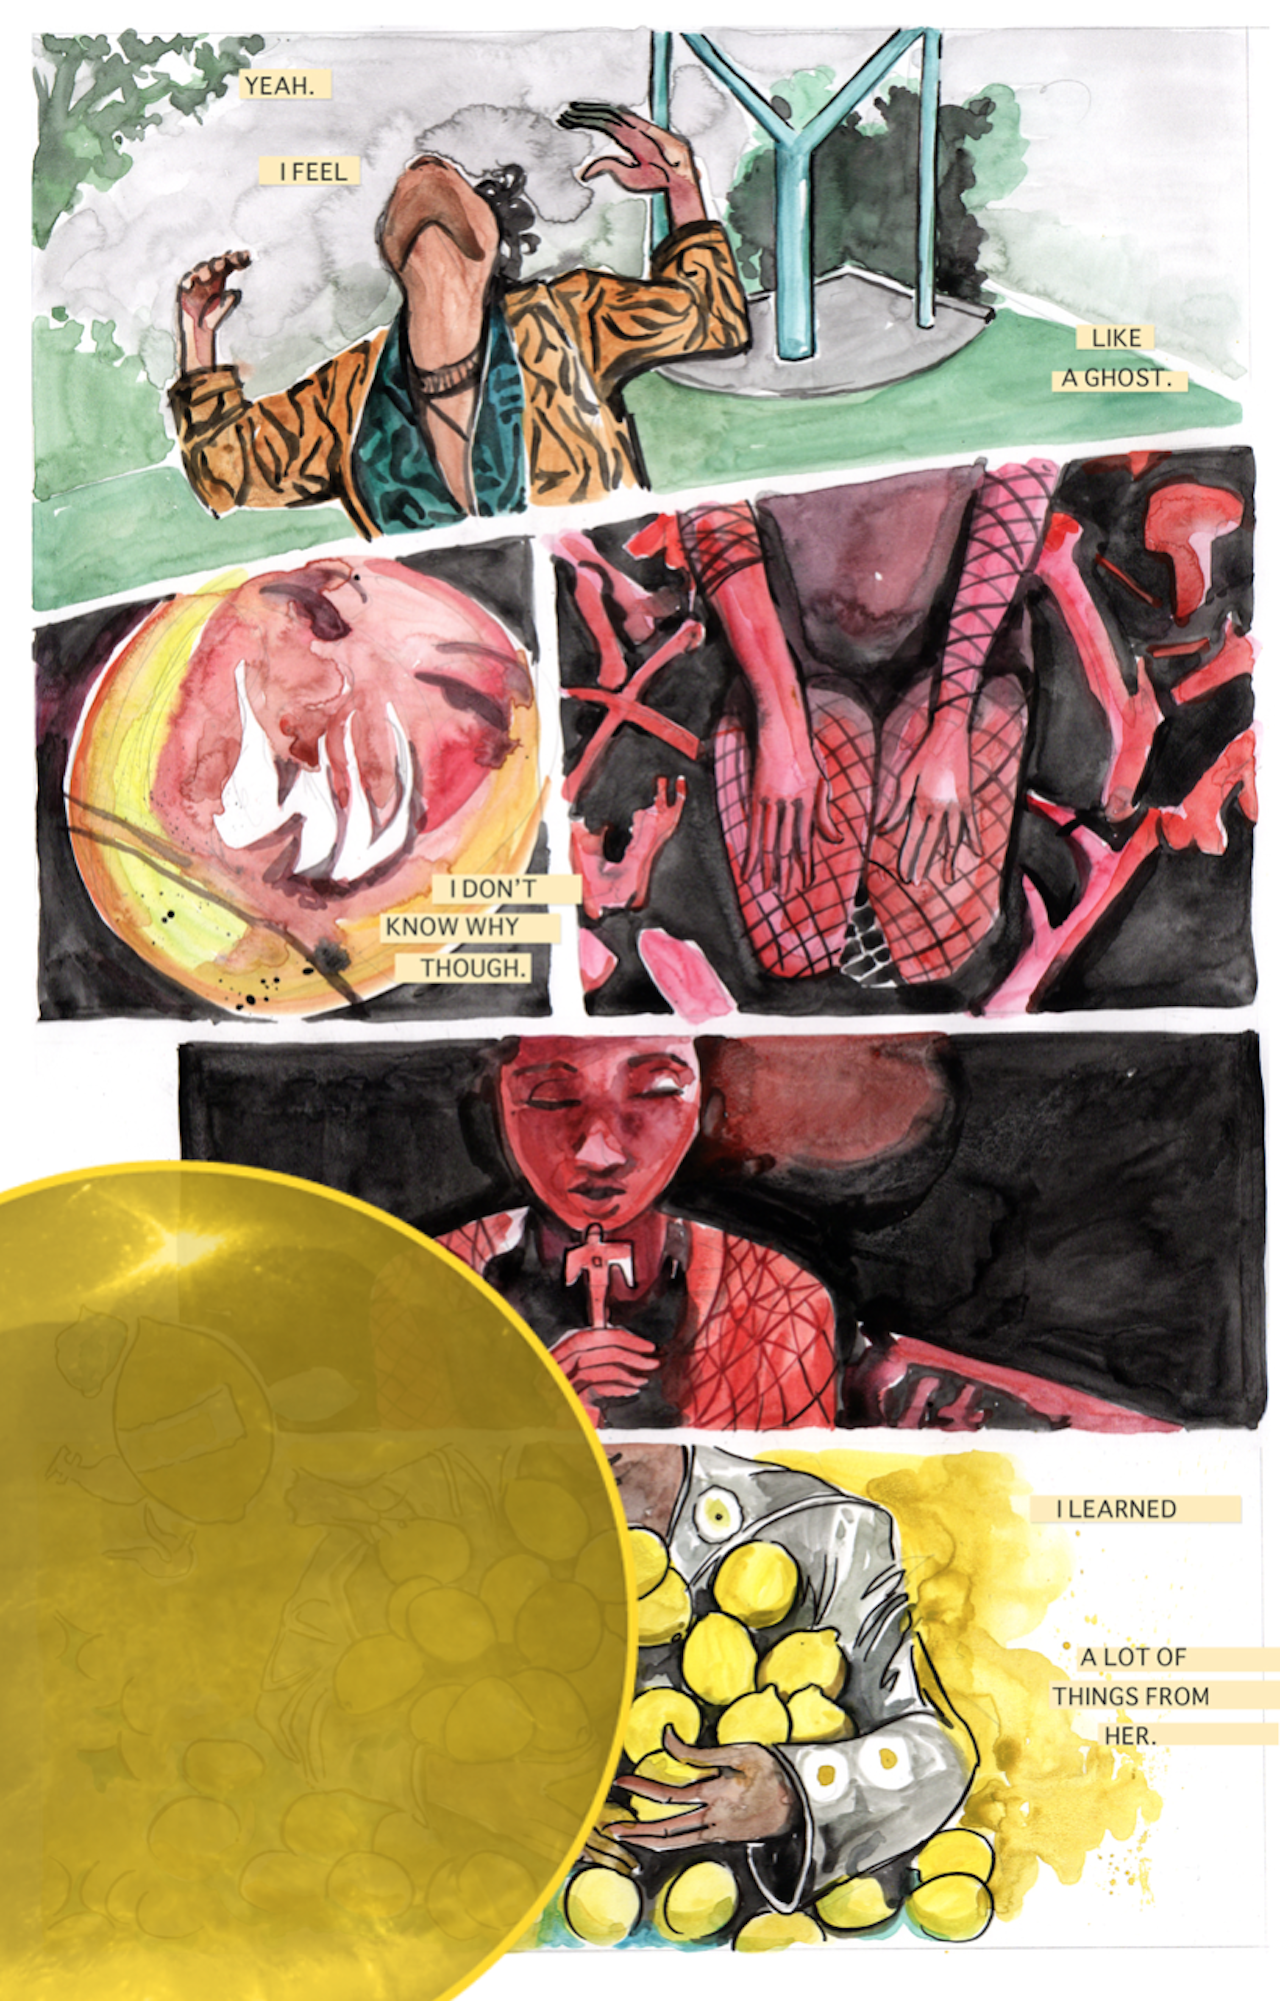 #LOVELIEF: Jamaica Dyer the comic artist you need to know.